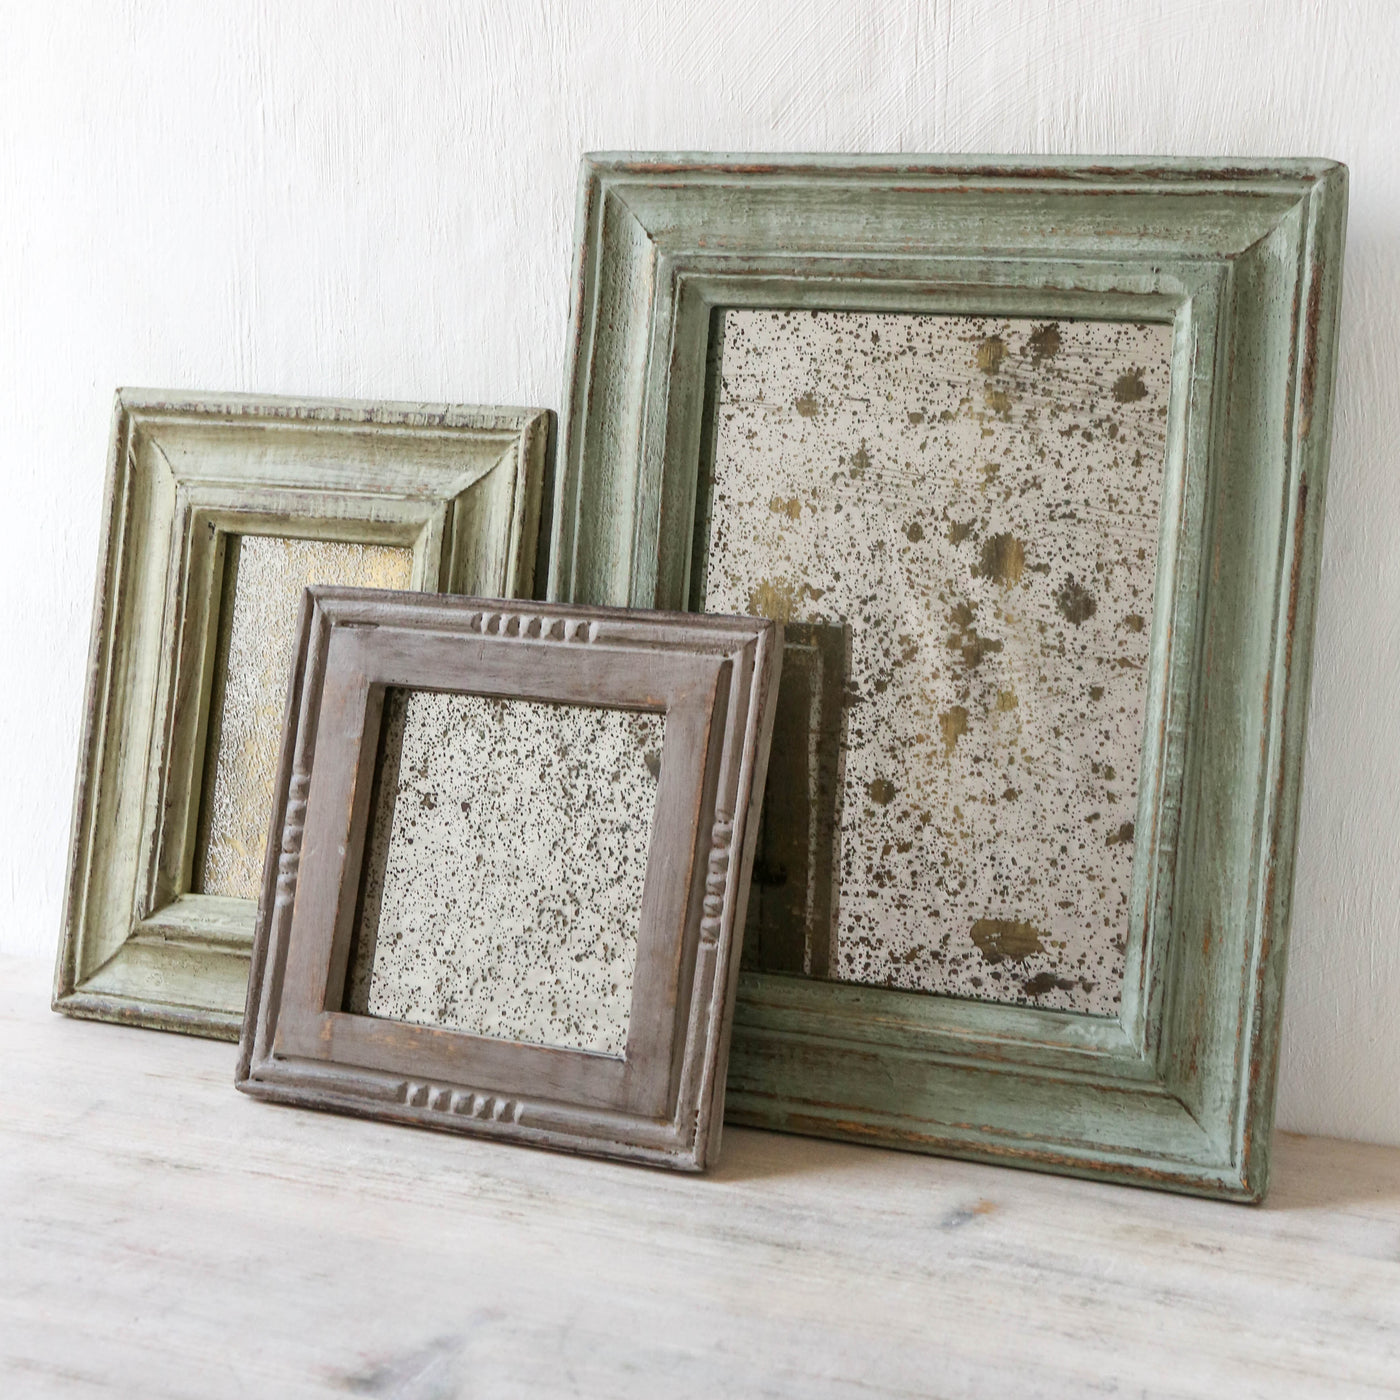 Small Distressed Rustic Mirror - Green